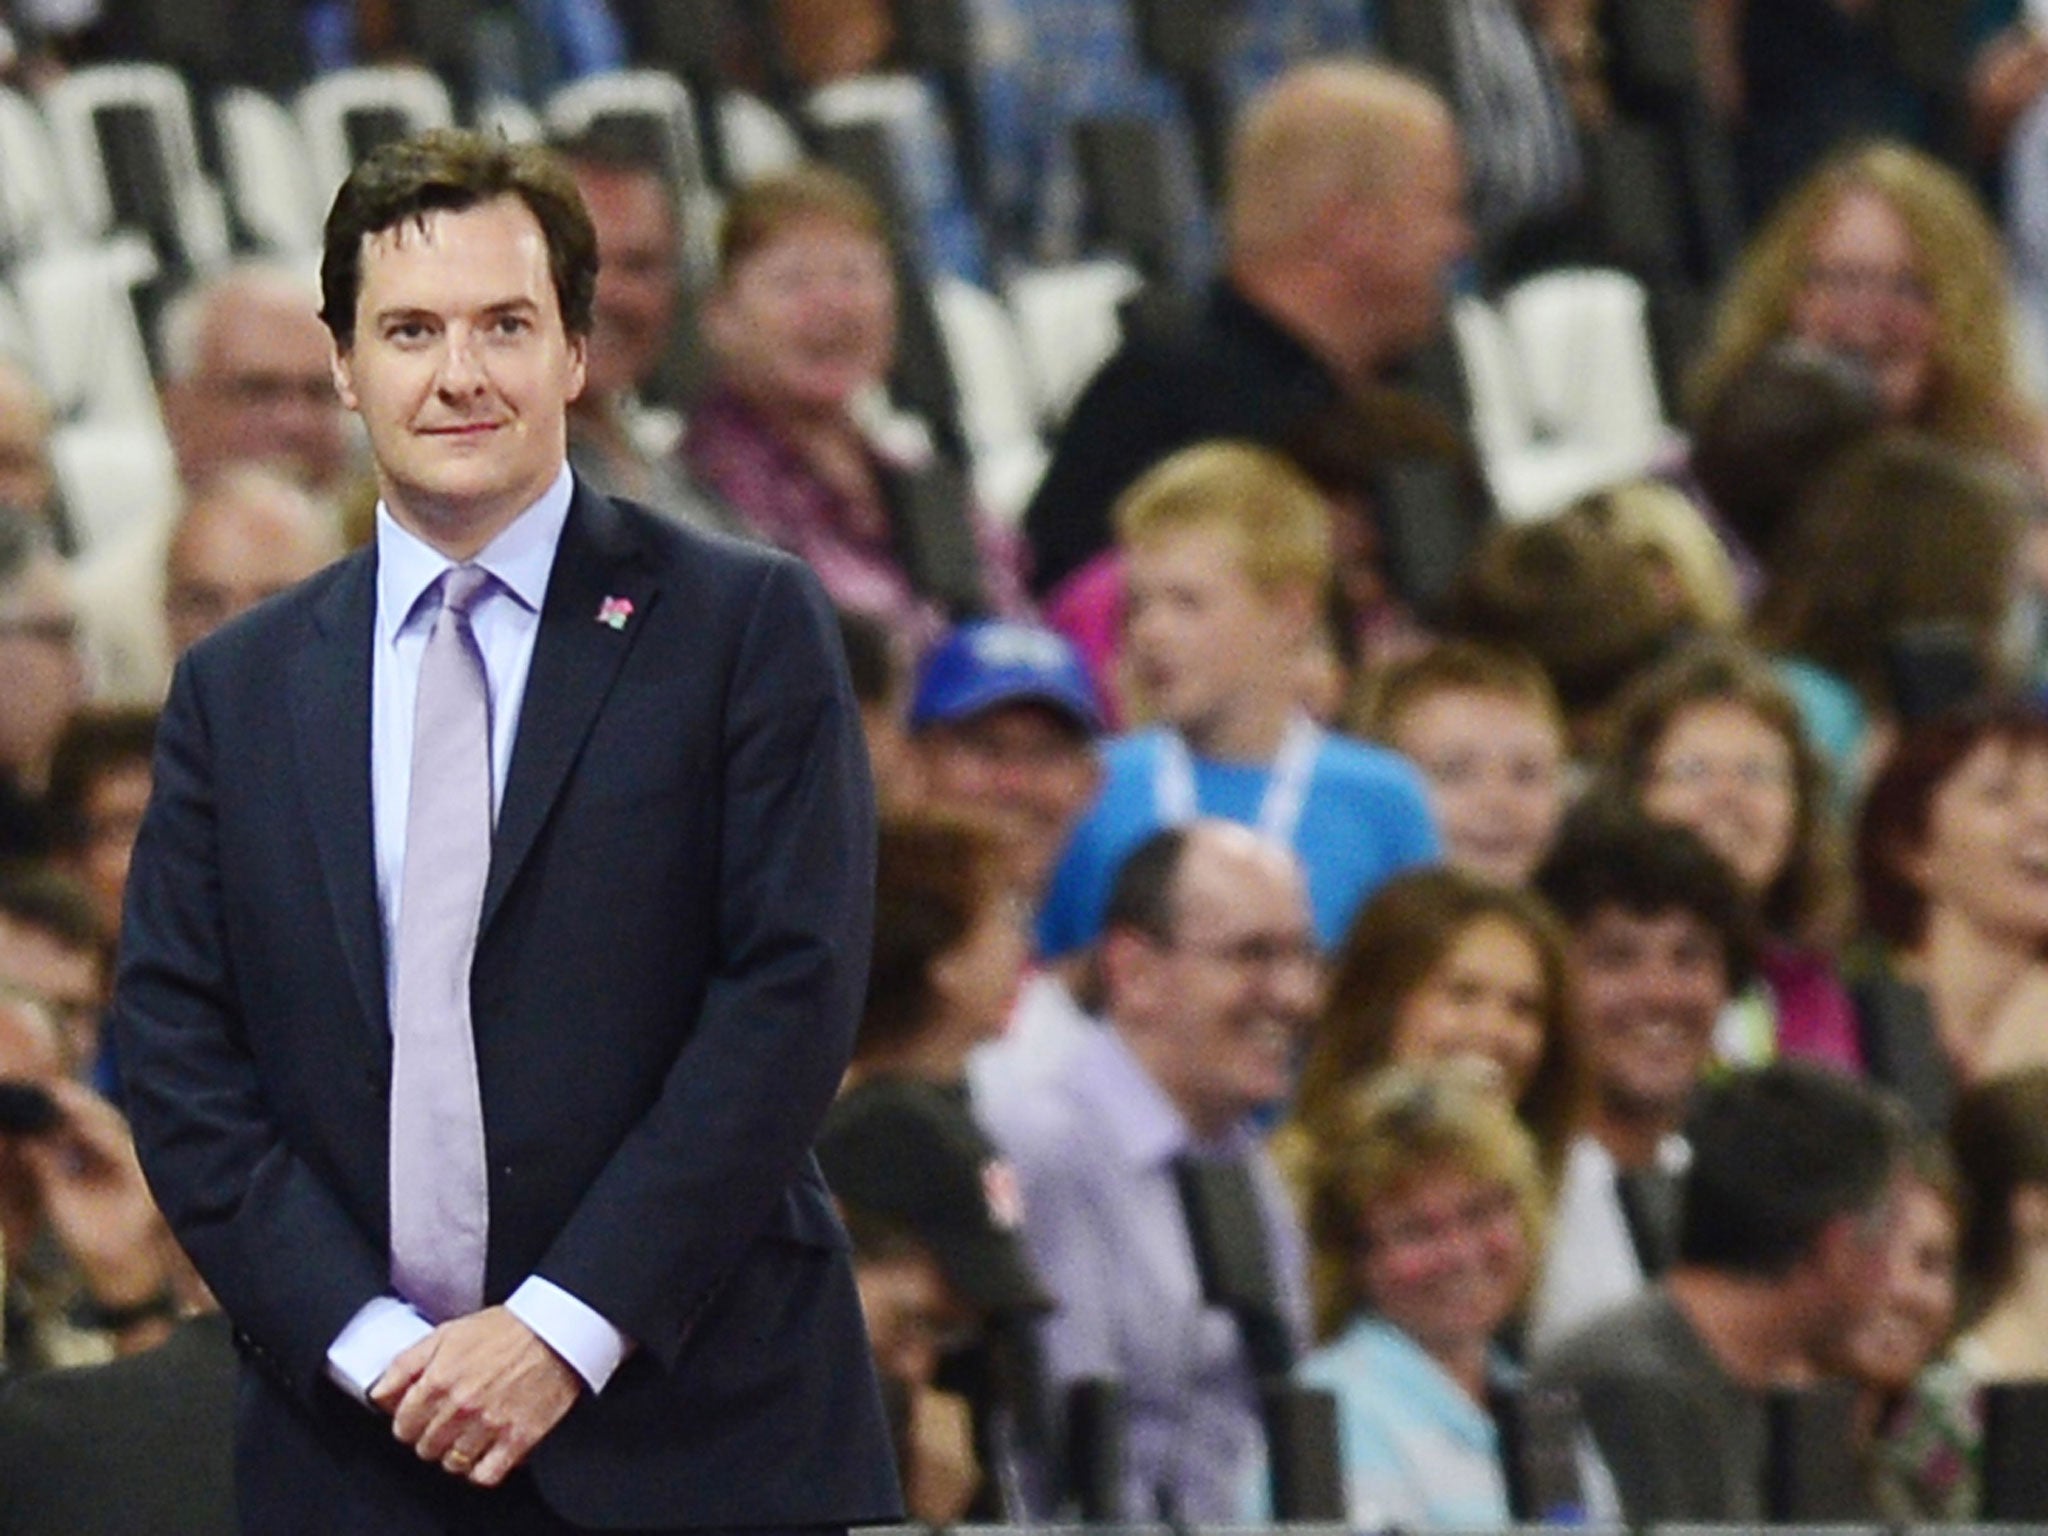 George Osborne’s image problem – as a perceived posh boy – was shown when he was booed at the Paralympics